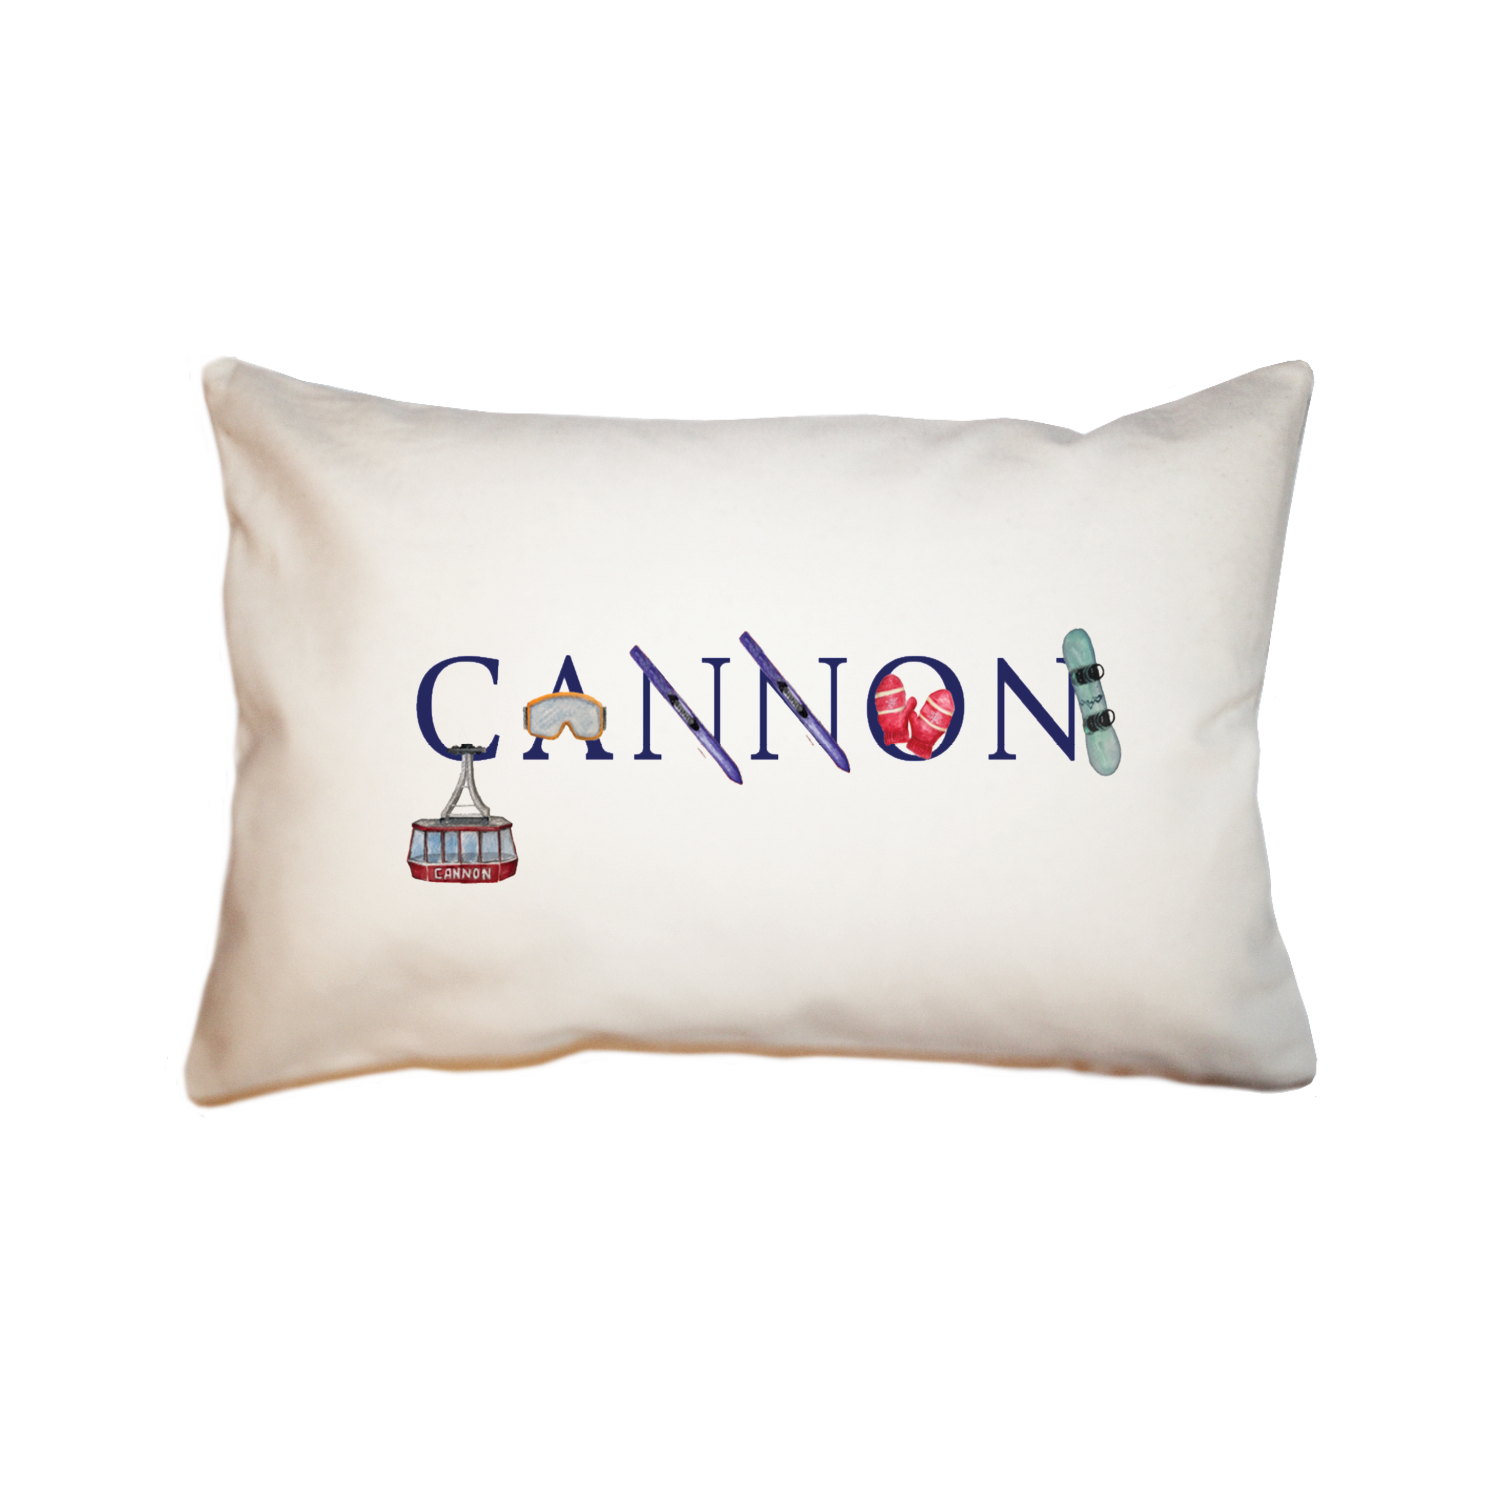 cannon large rectangle pillow